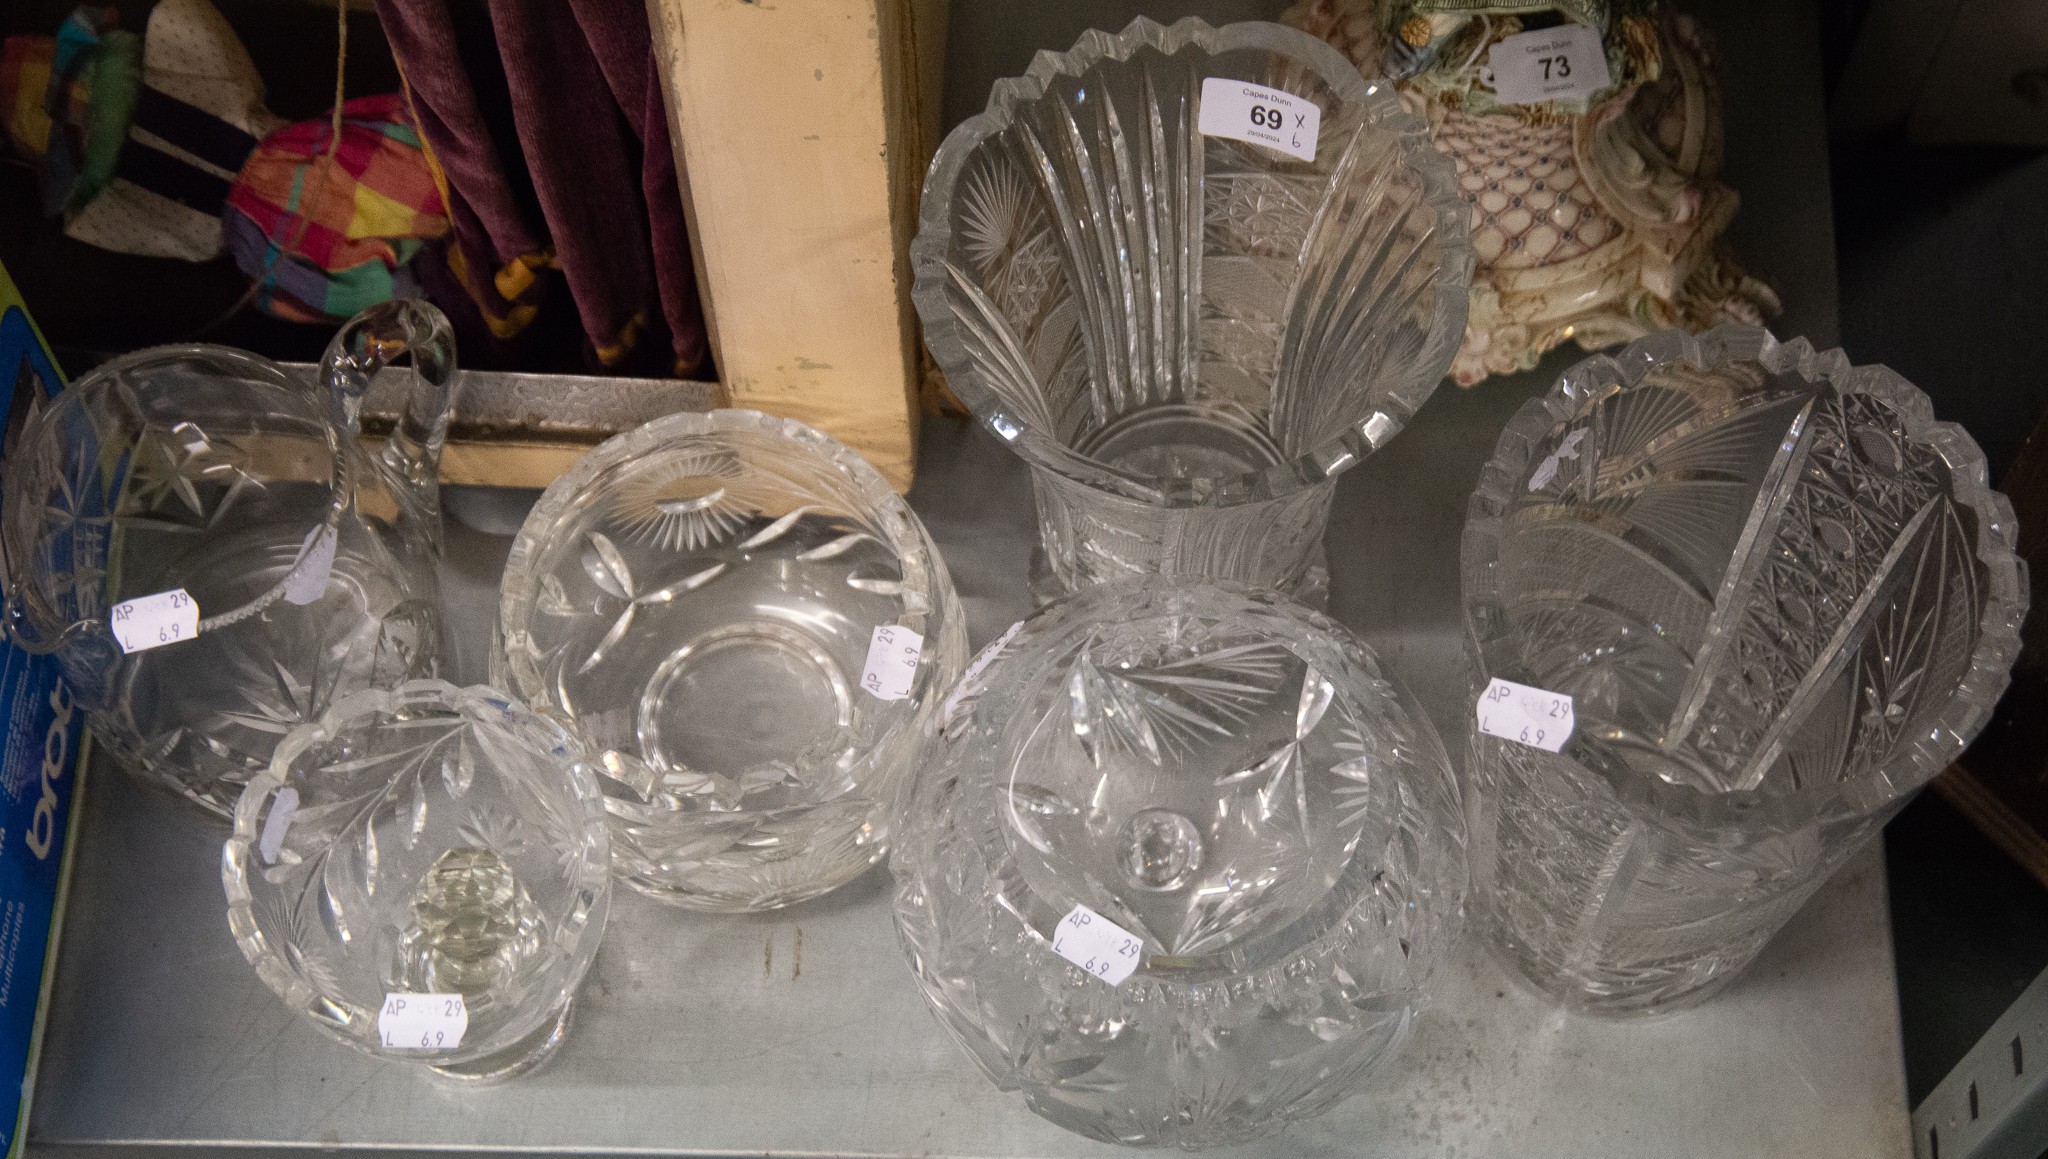 TWO LARGE BOHEMIAN LEAD CRYSTAL VASES; TOGETHER WITH A GLOBE VASE TWO SMALLER EXAMPLES AND A WATER